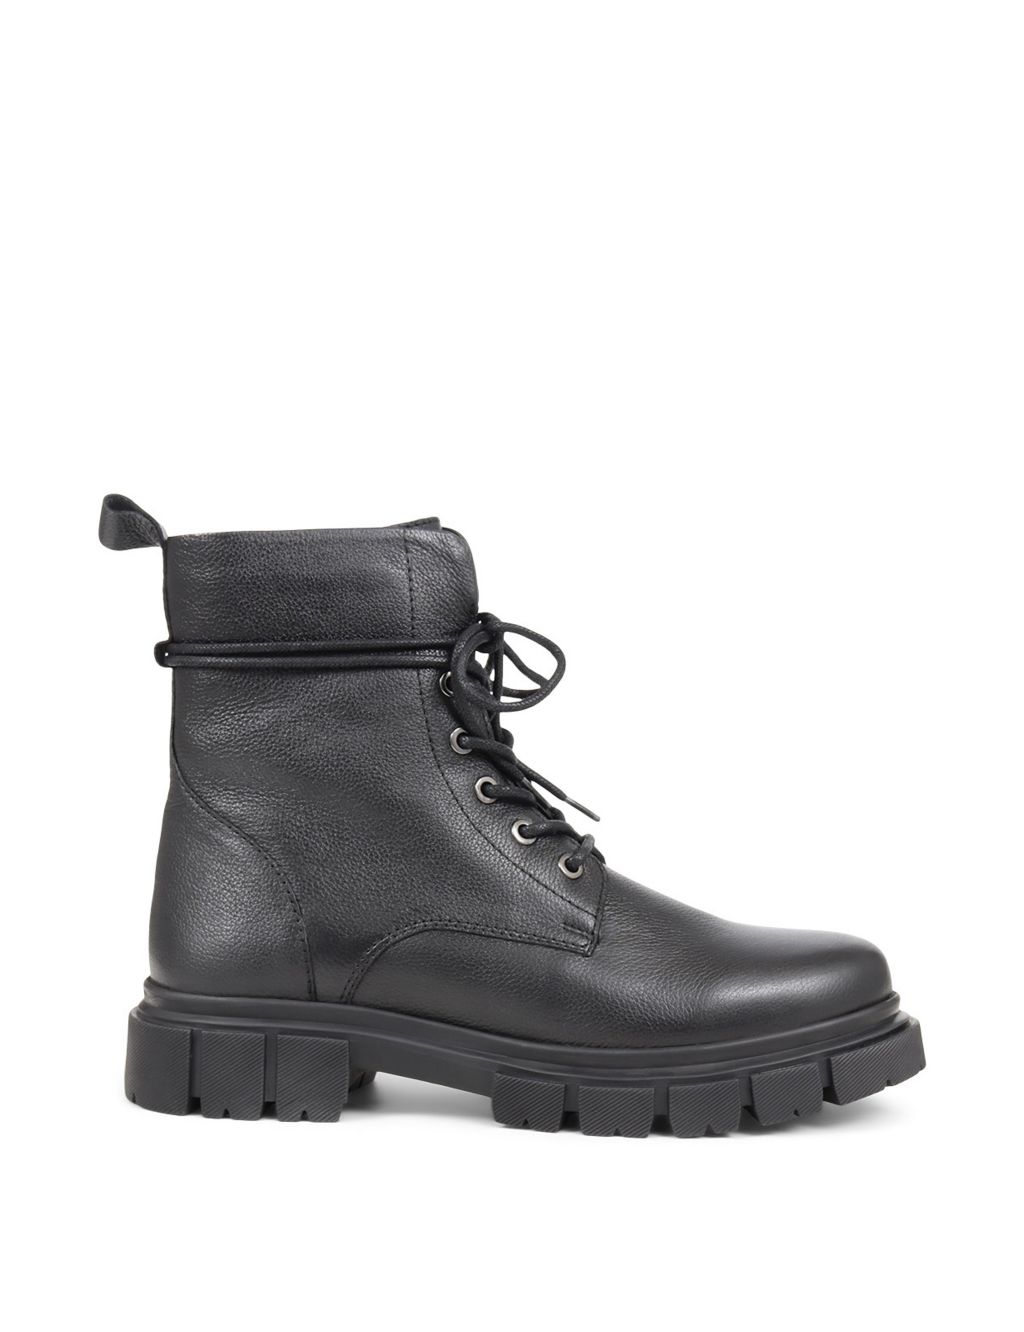 Leather Biker Lace Up Cleated Ankle Boots | Jones Bootmaker | M&S